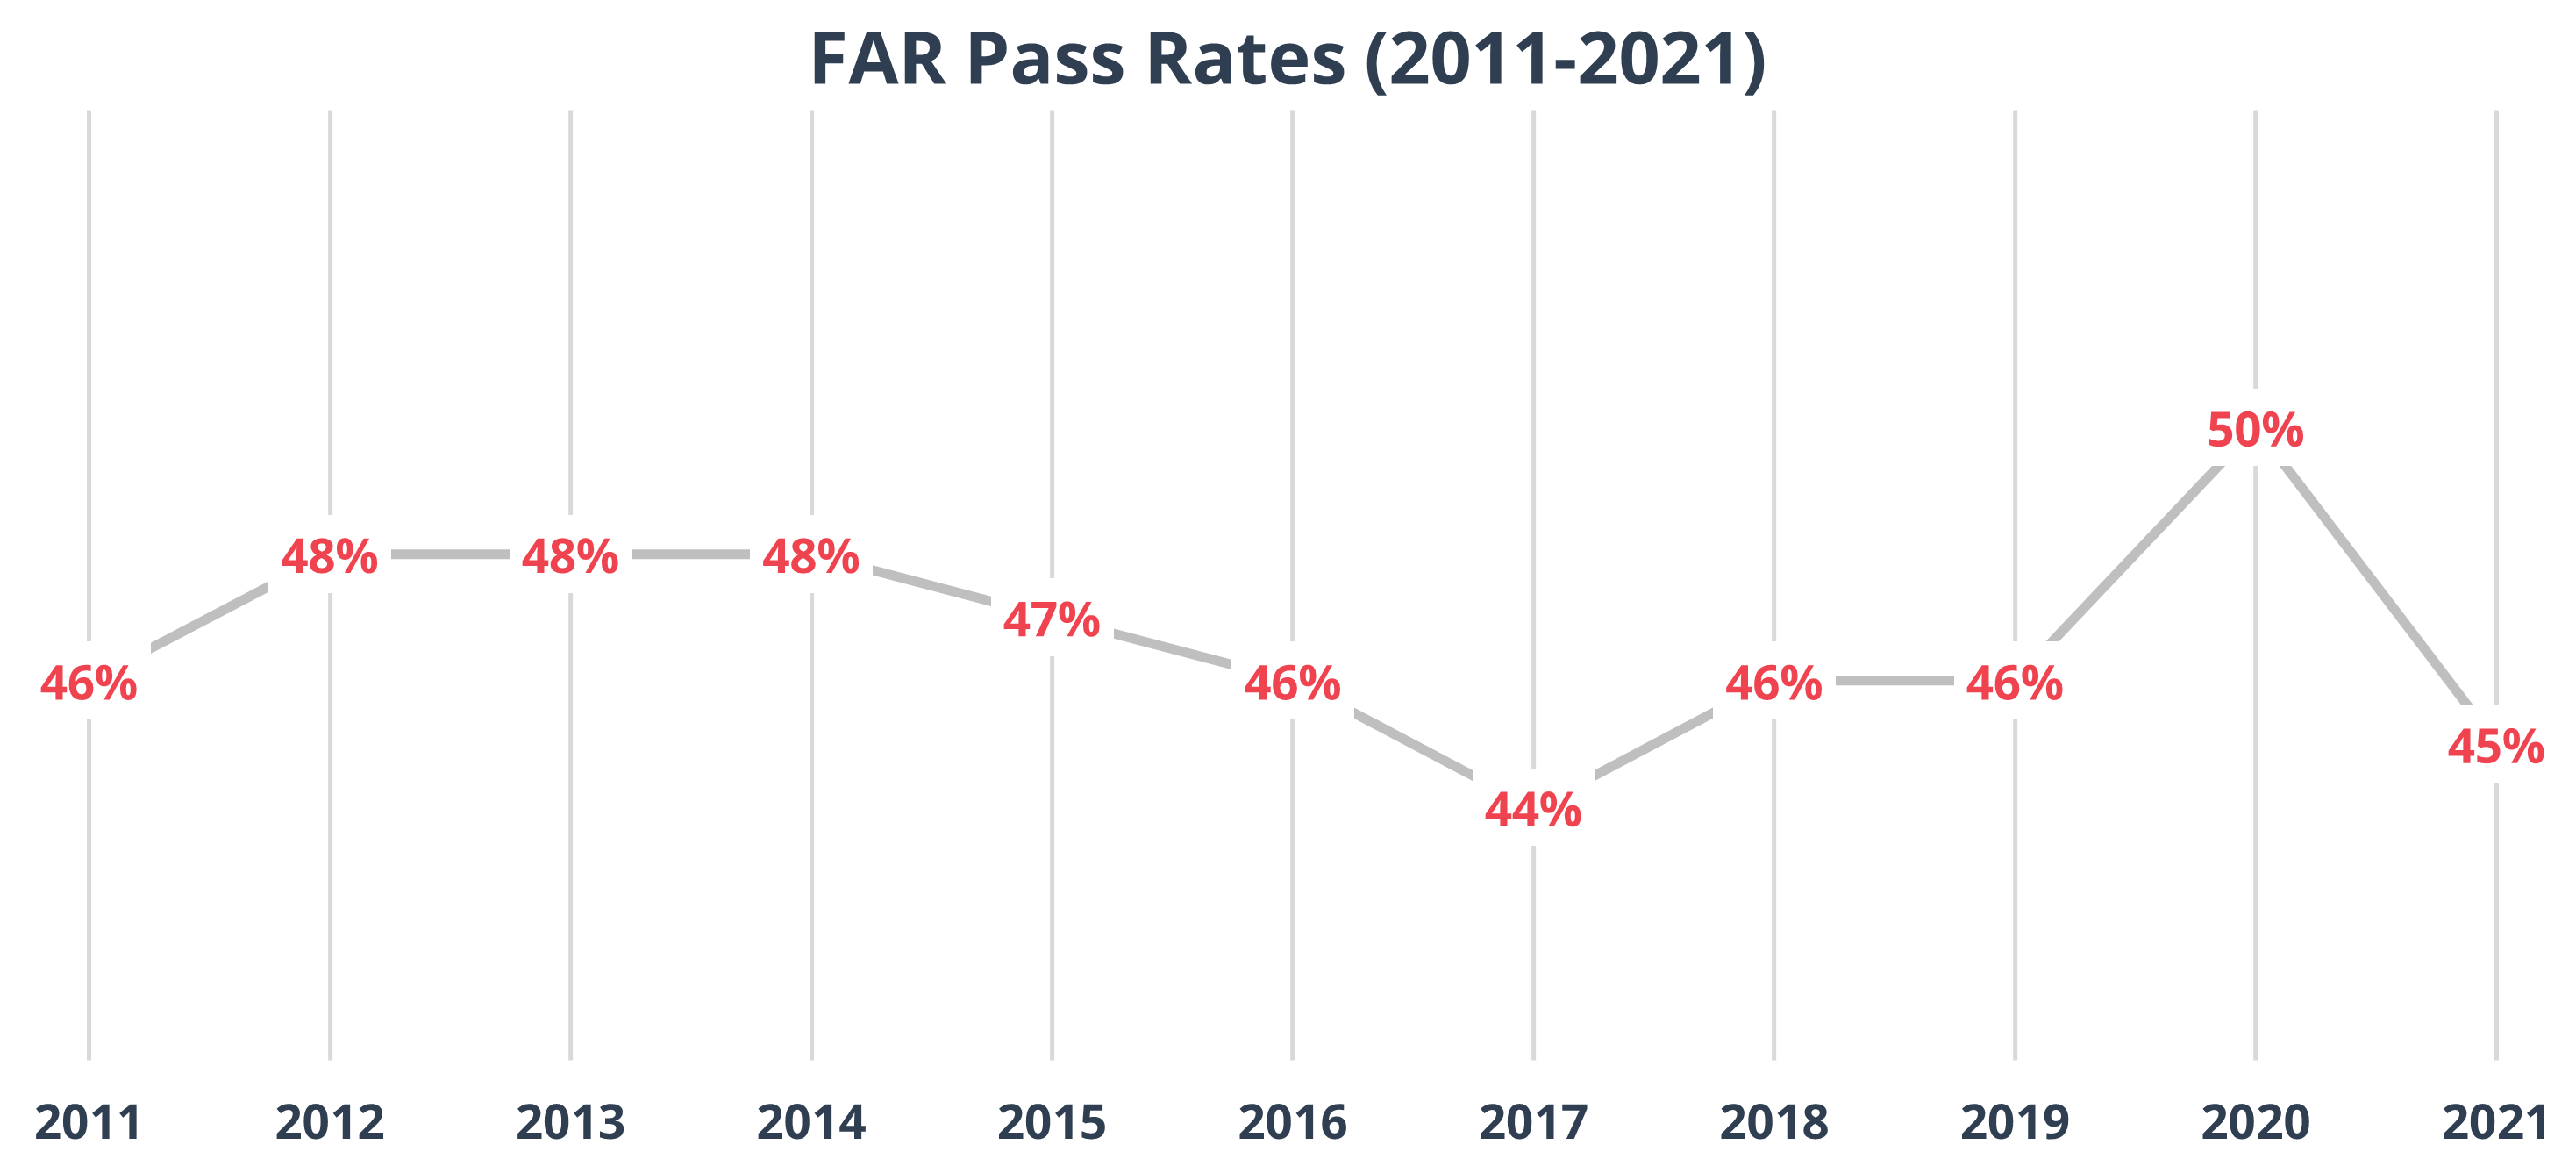 Line graph showing CPA FAR Exam pass rates from 2011-2021.